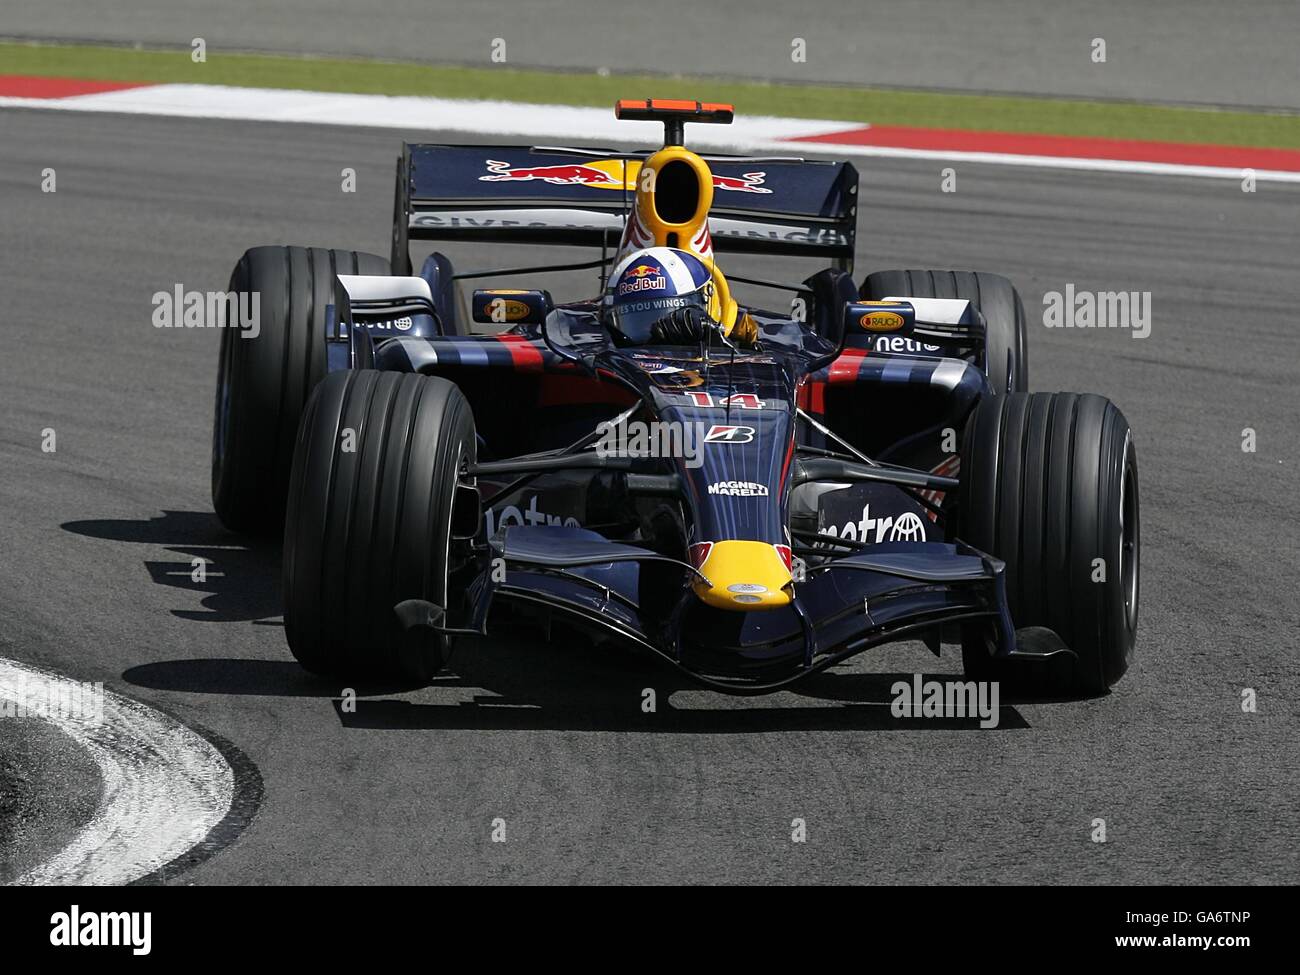 David Coulthard, Red Bull Racing, during the European Formula One Grand Prix at the Nurburgring, Germany Stock Photo